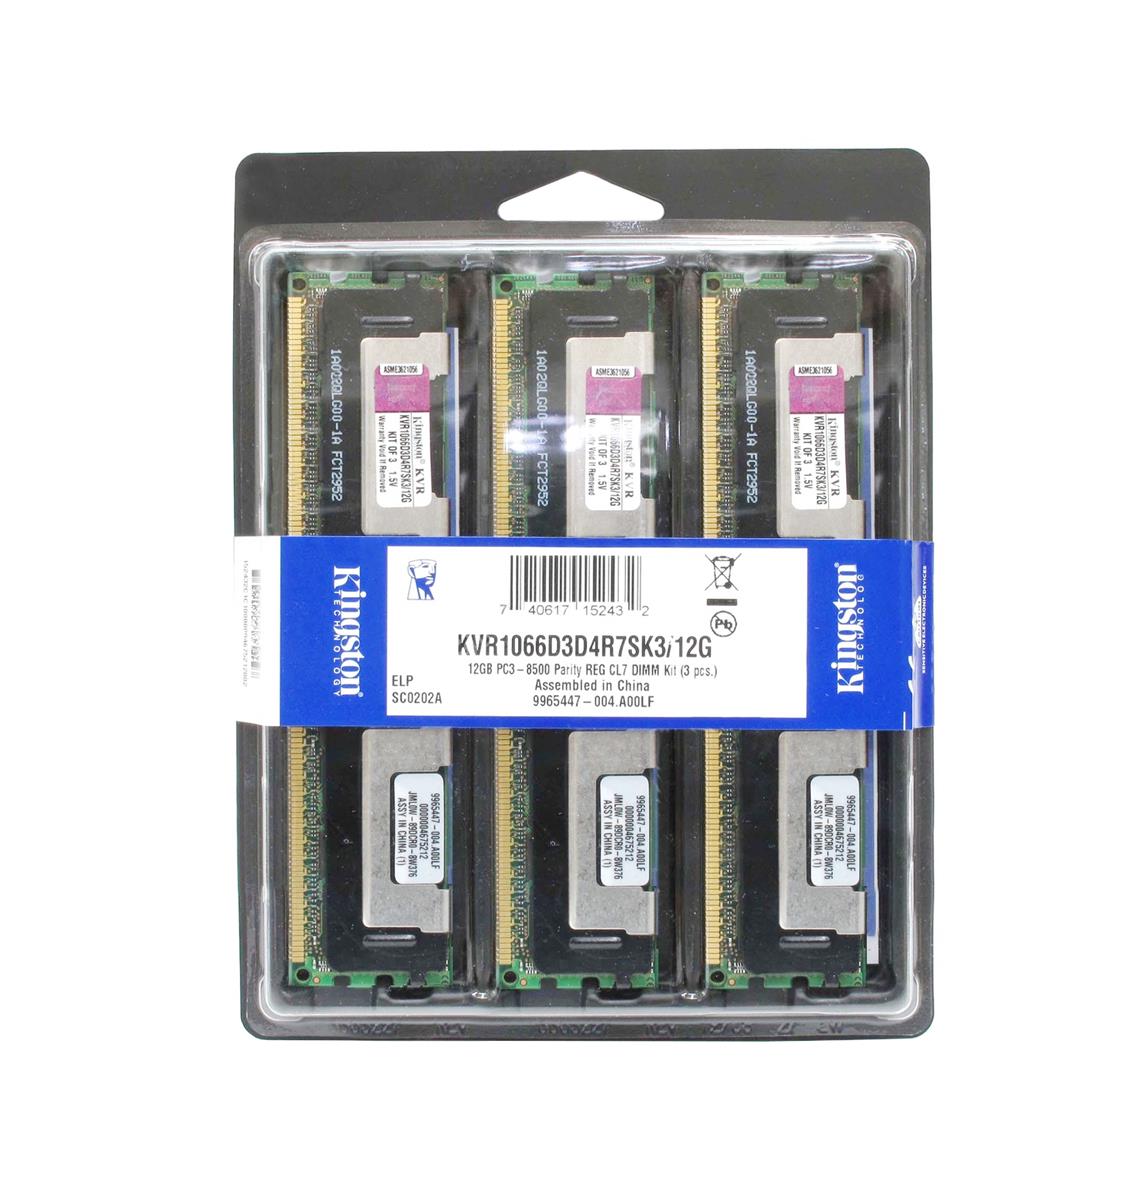 KVR1066D3D4R7SK3/12G Kingston 12GB Kit (3 X 4GB) PC3-8500 DDR3-1066MHz ECC Registered CL7 240-Pin DIMM Dual Rank x4 Memory (Kit of 3) with Thermal Sensor